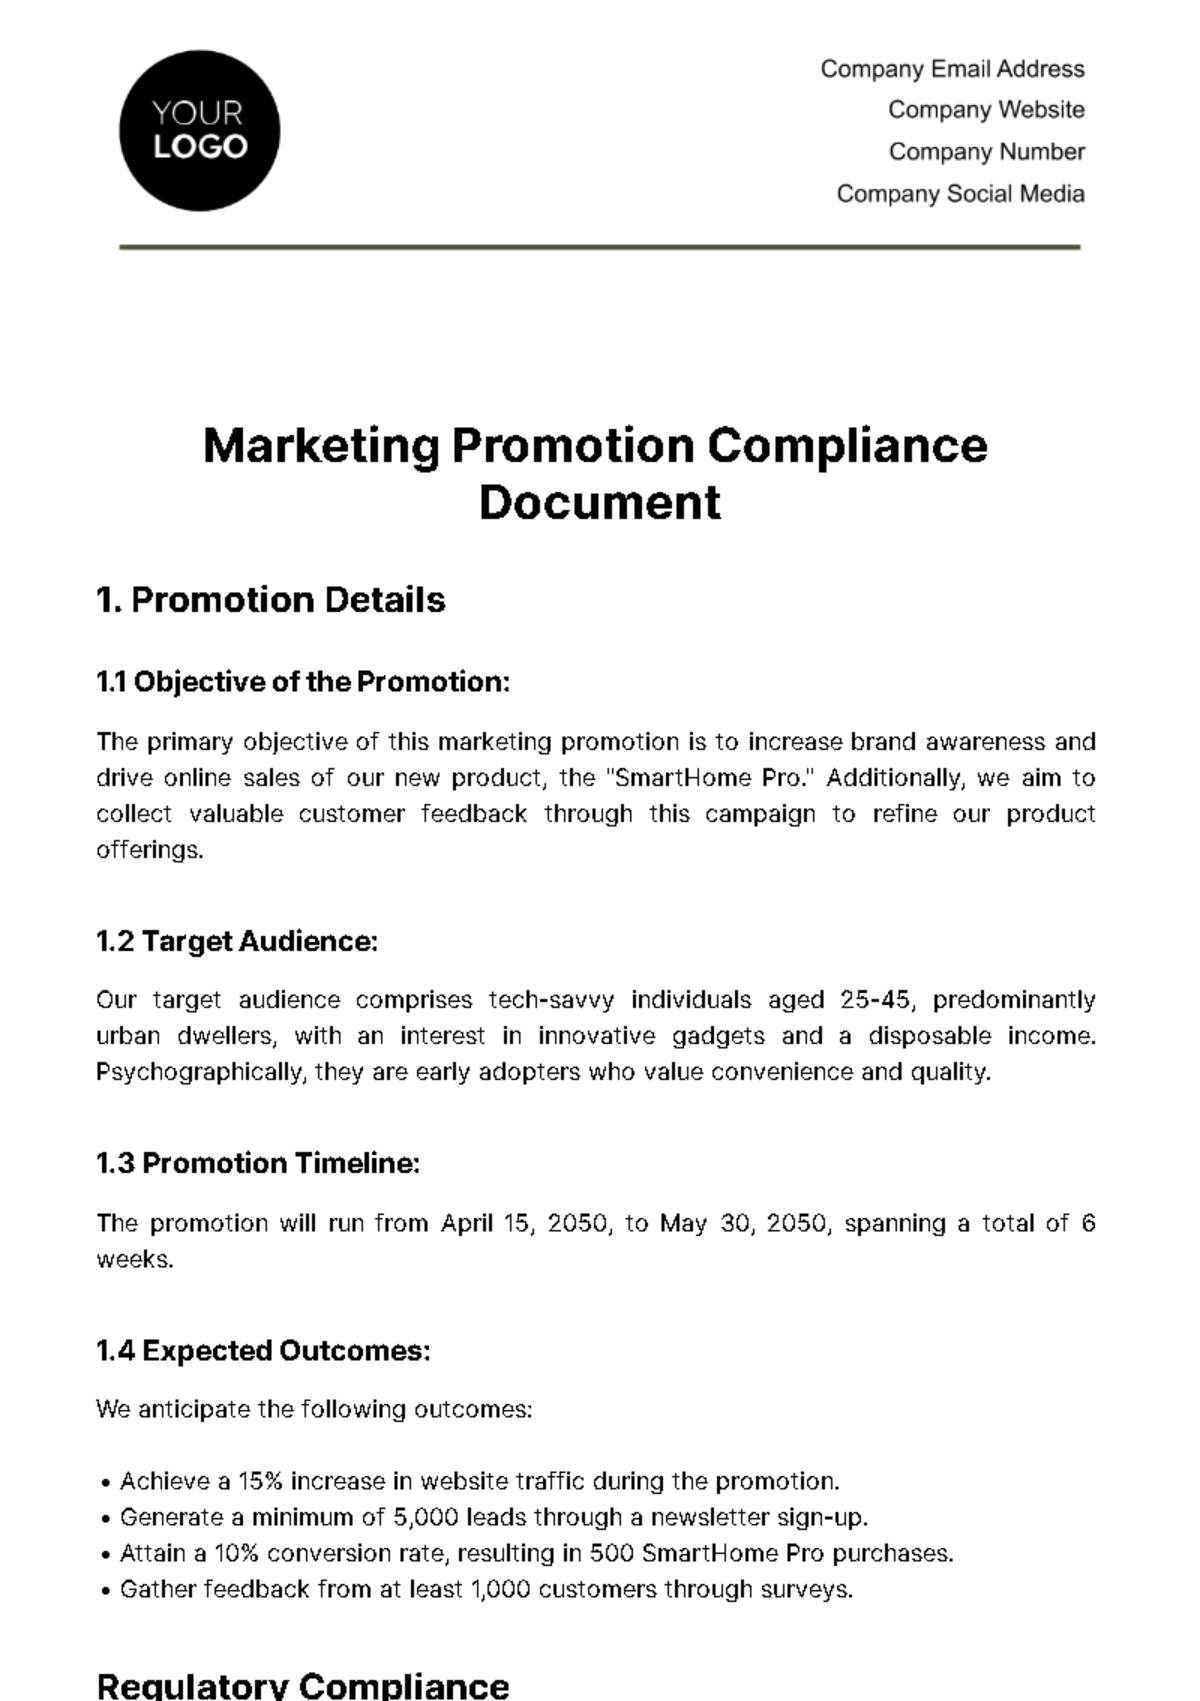 Marketing Promotion Compliance Document Template